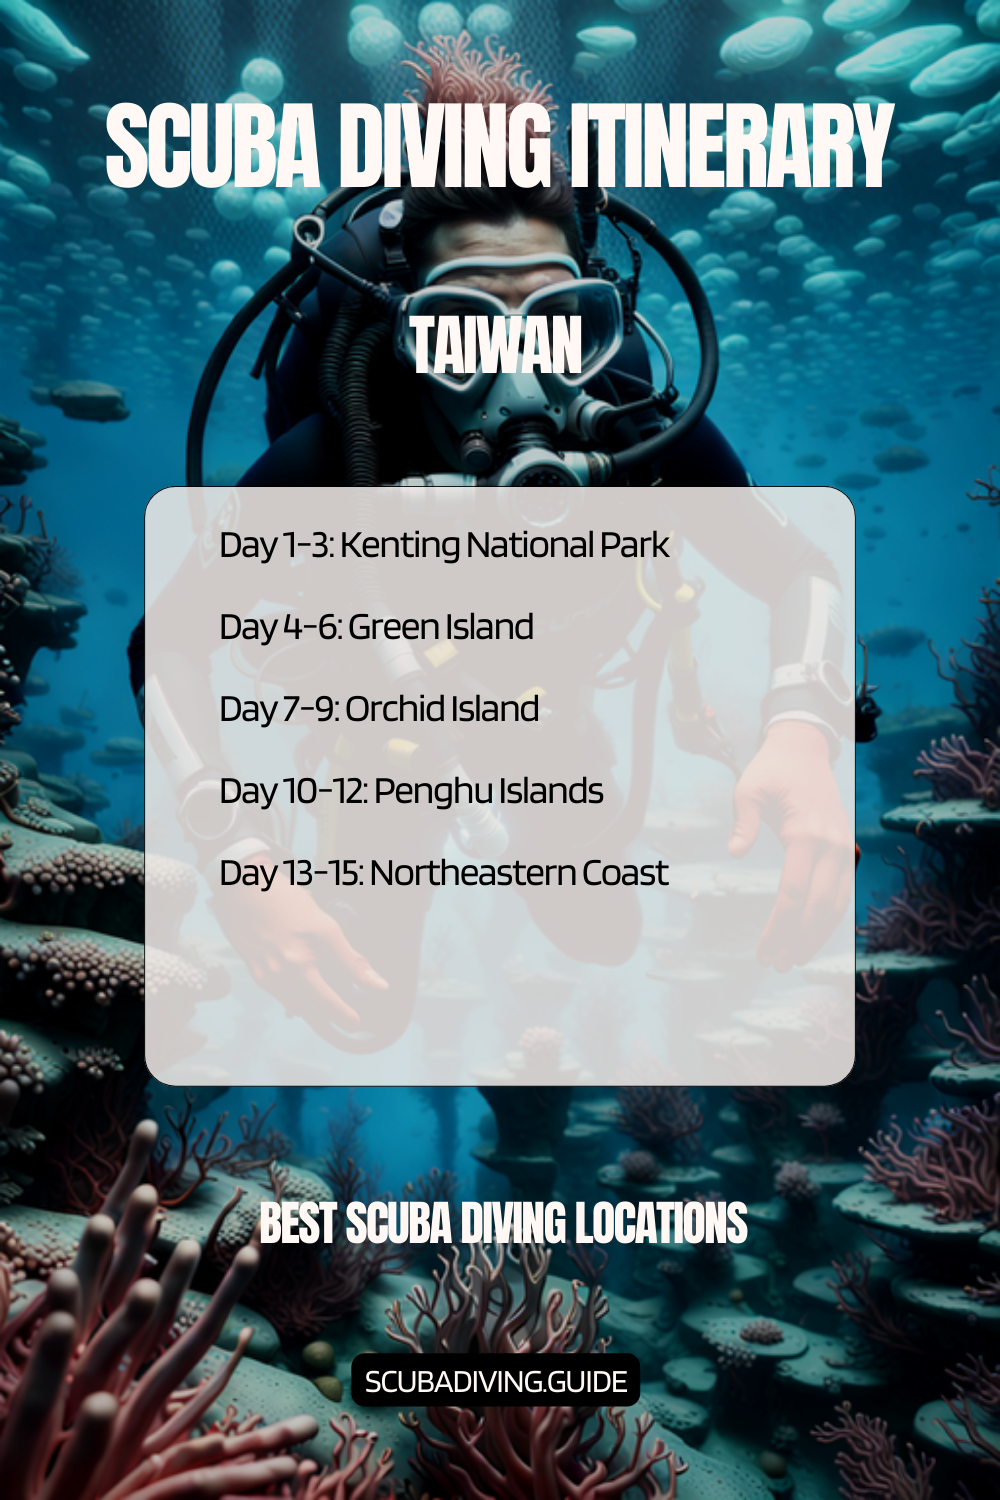 Taiwan Recommended Scuba Diving Itinerary